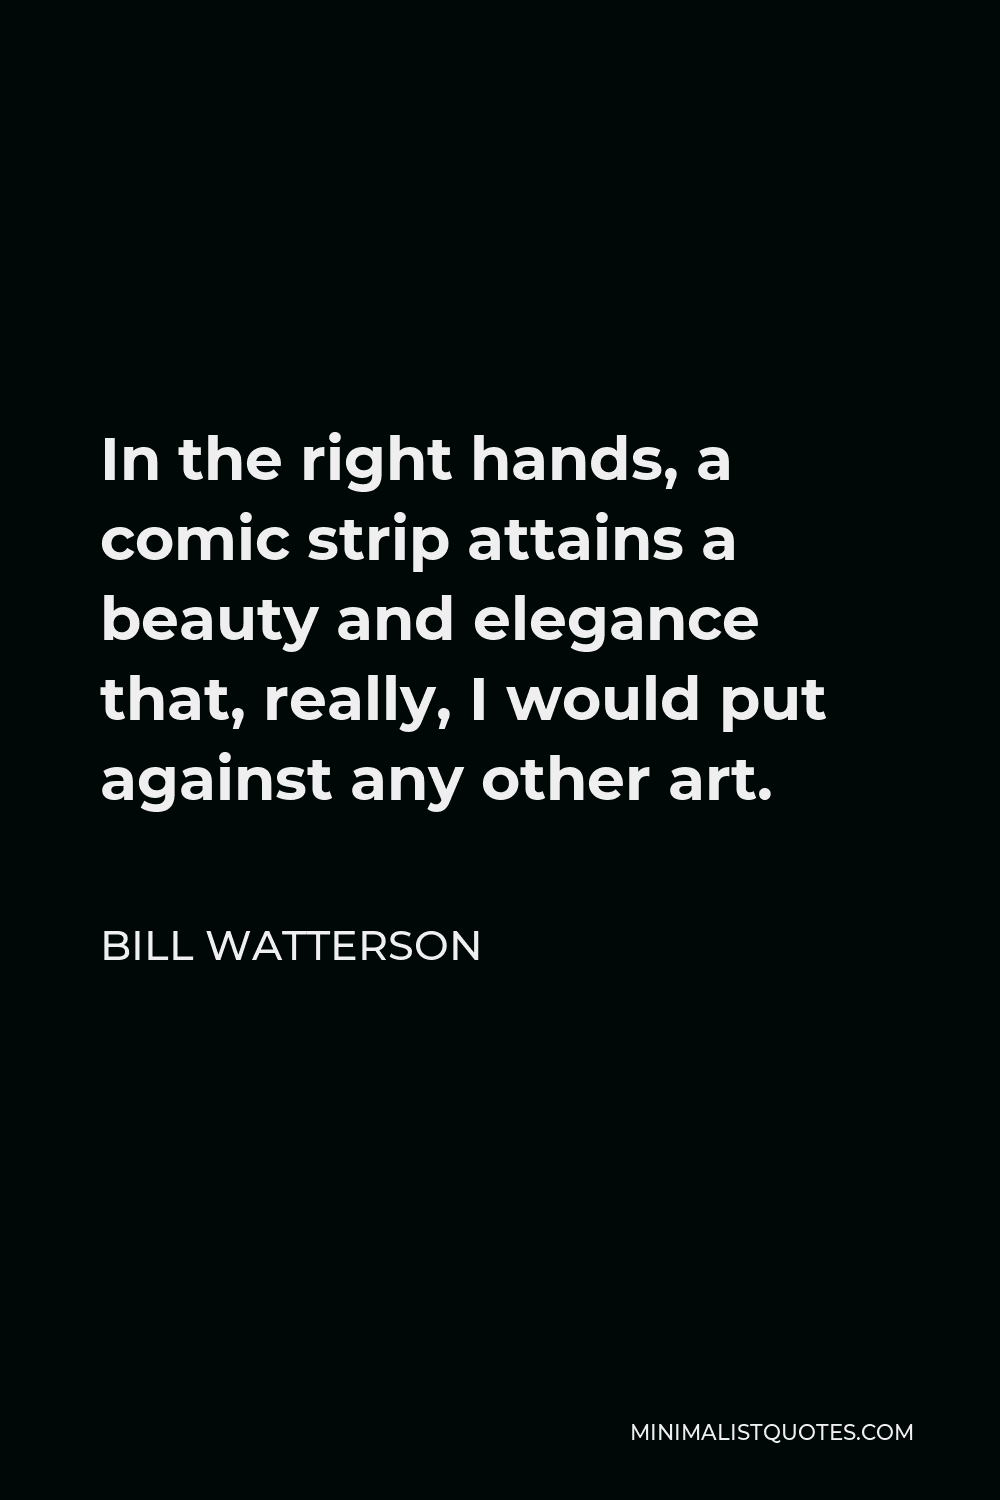 Bill Watterson Quote - In the right hands, a comic strip attains a beauty and elegance that, really, I would put against any other art.